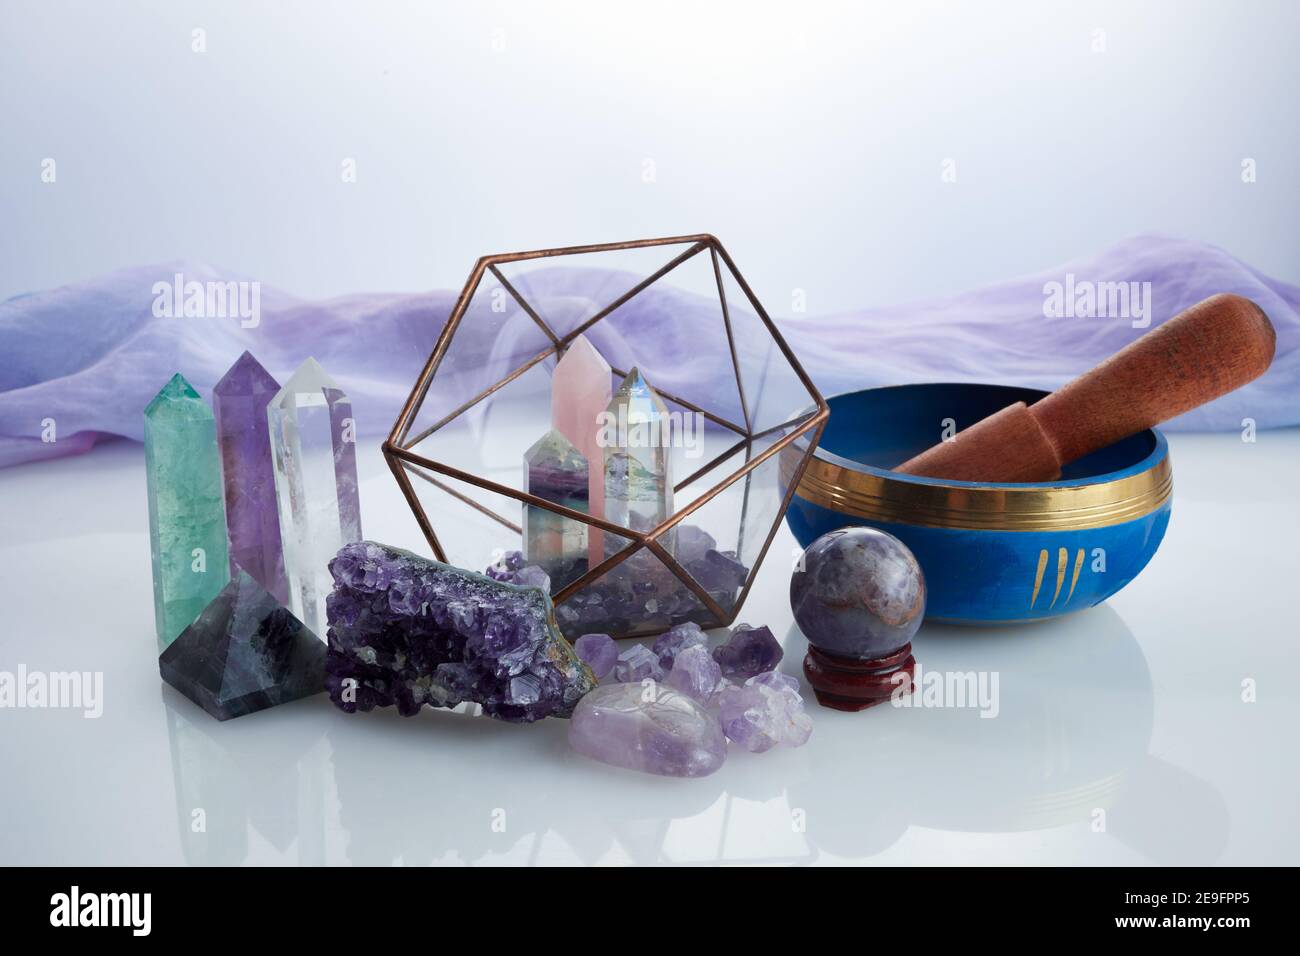 Healing gemstones crystals. Reiki, esoteric, relax and balance conept. Stock Photo